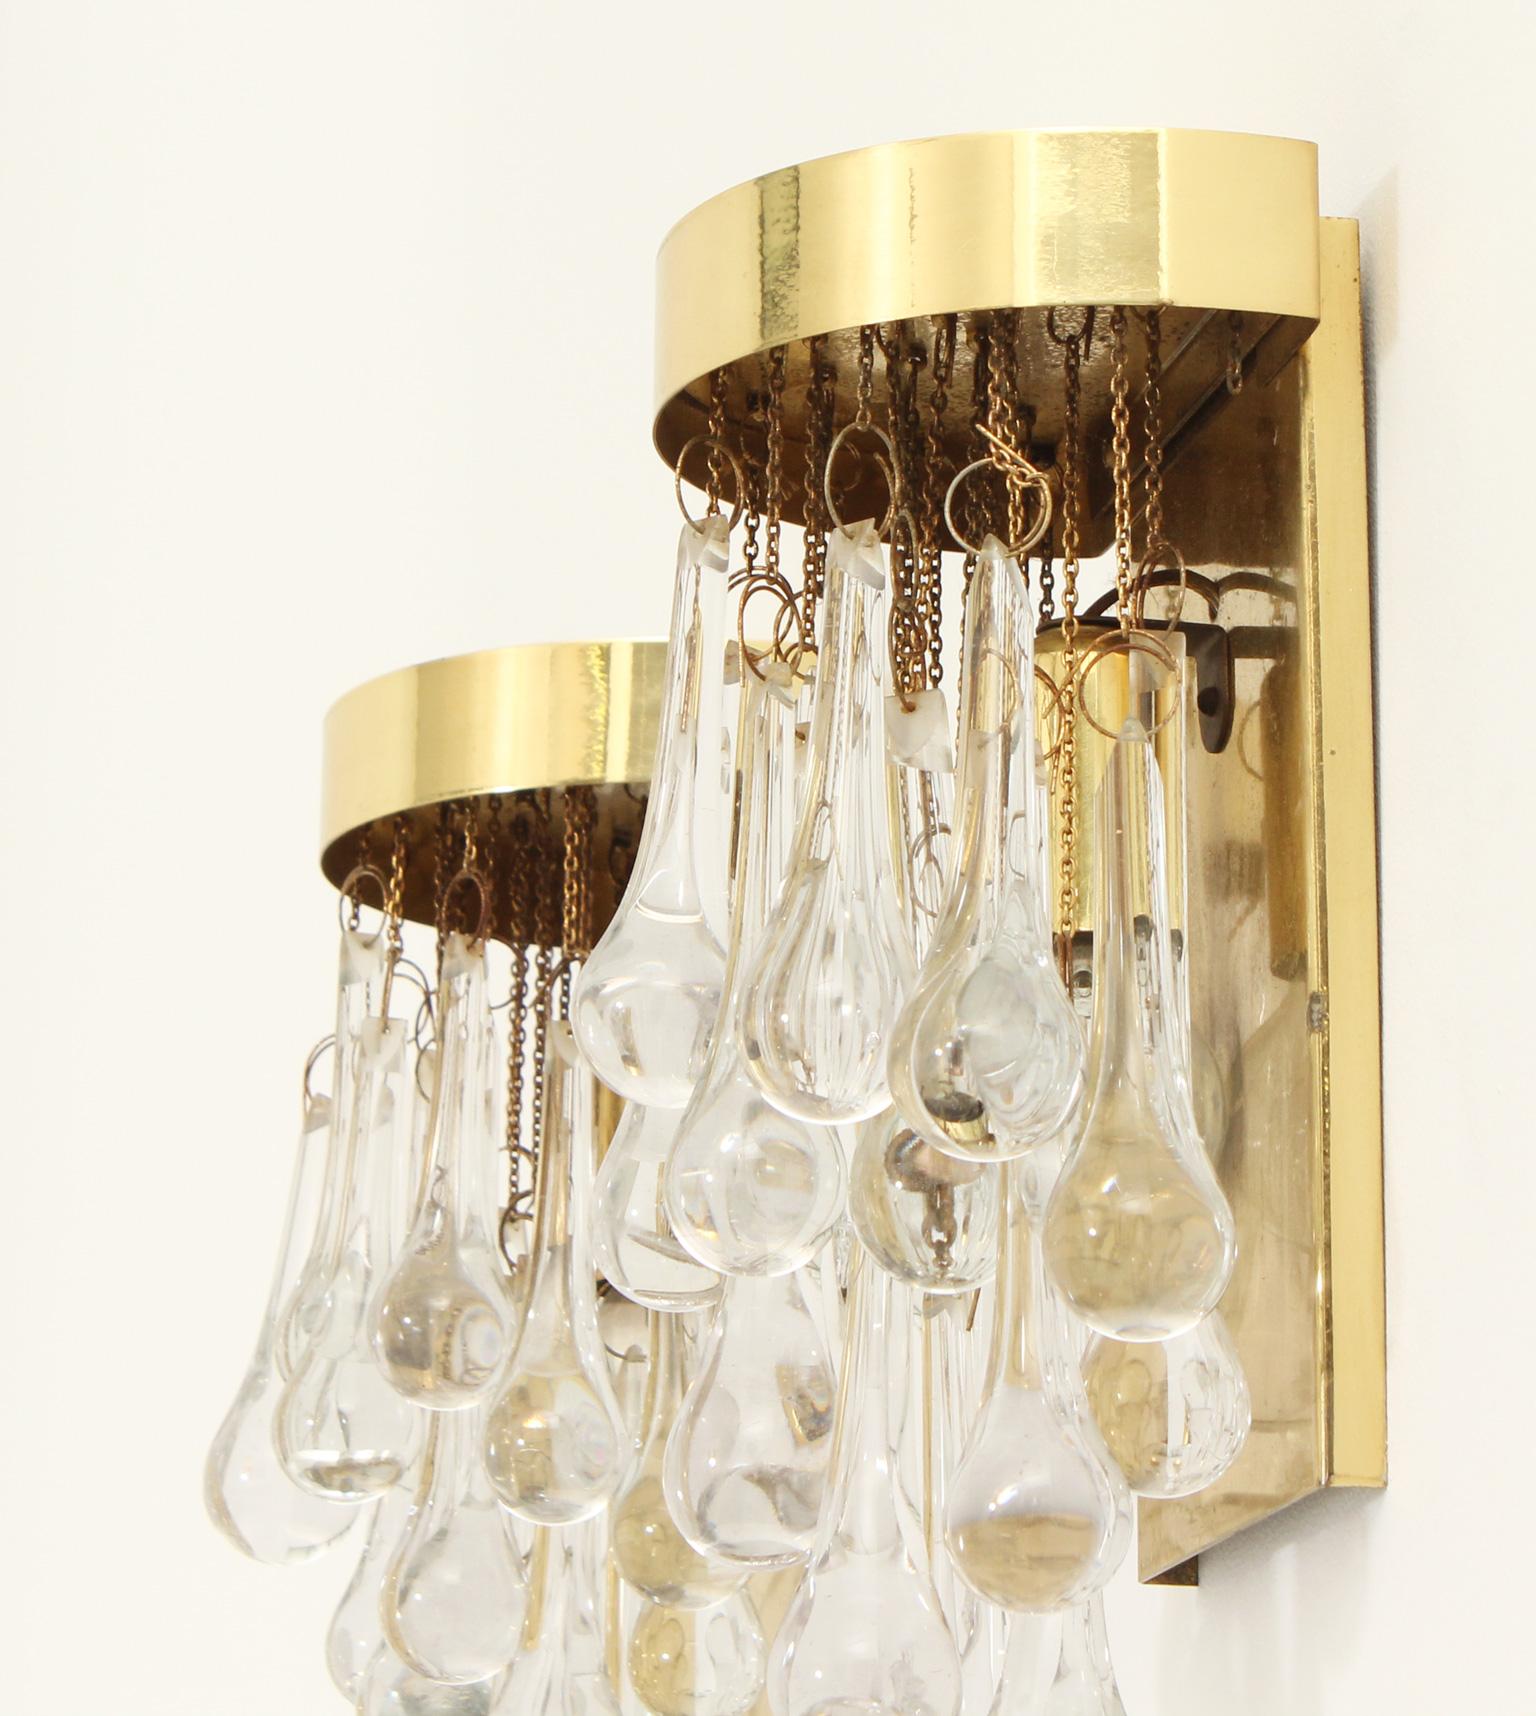 Pair of Brass and Glass Teardrop Sconces by Lumica, Spain, 1970's For Sale 1